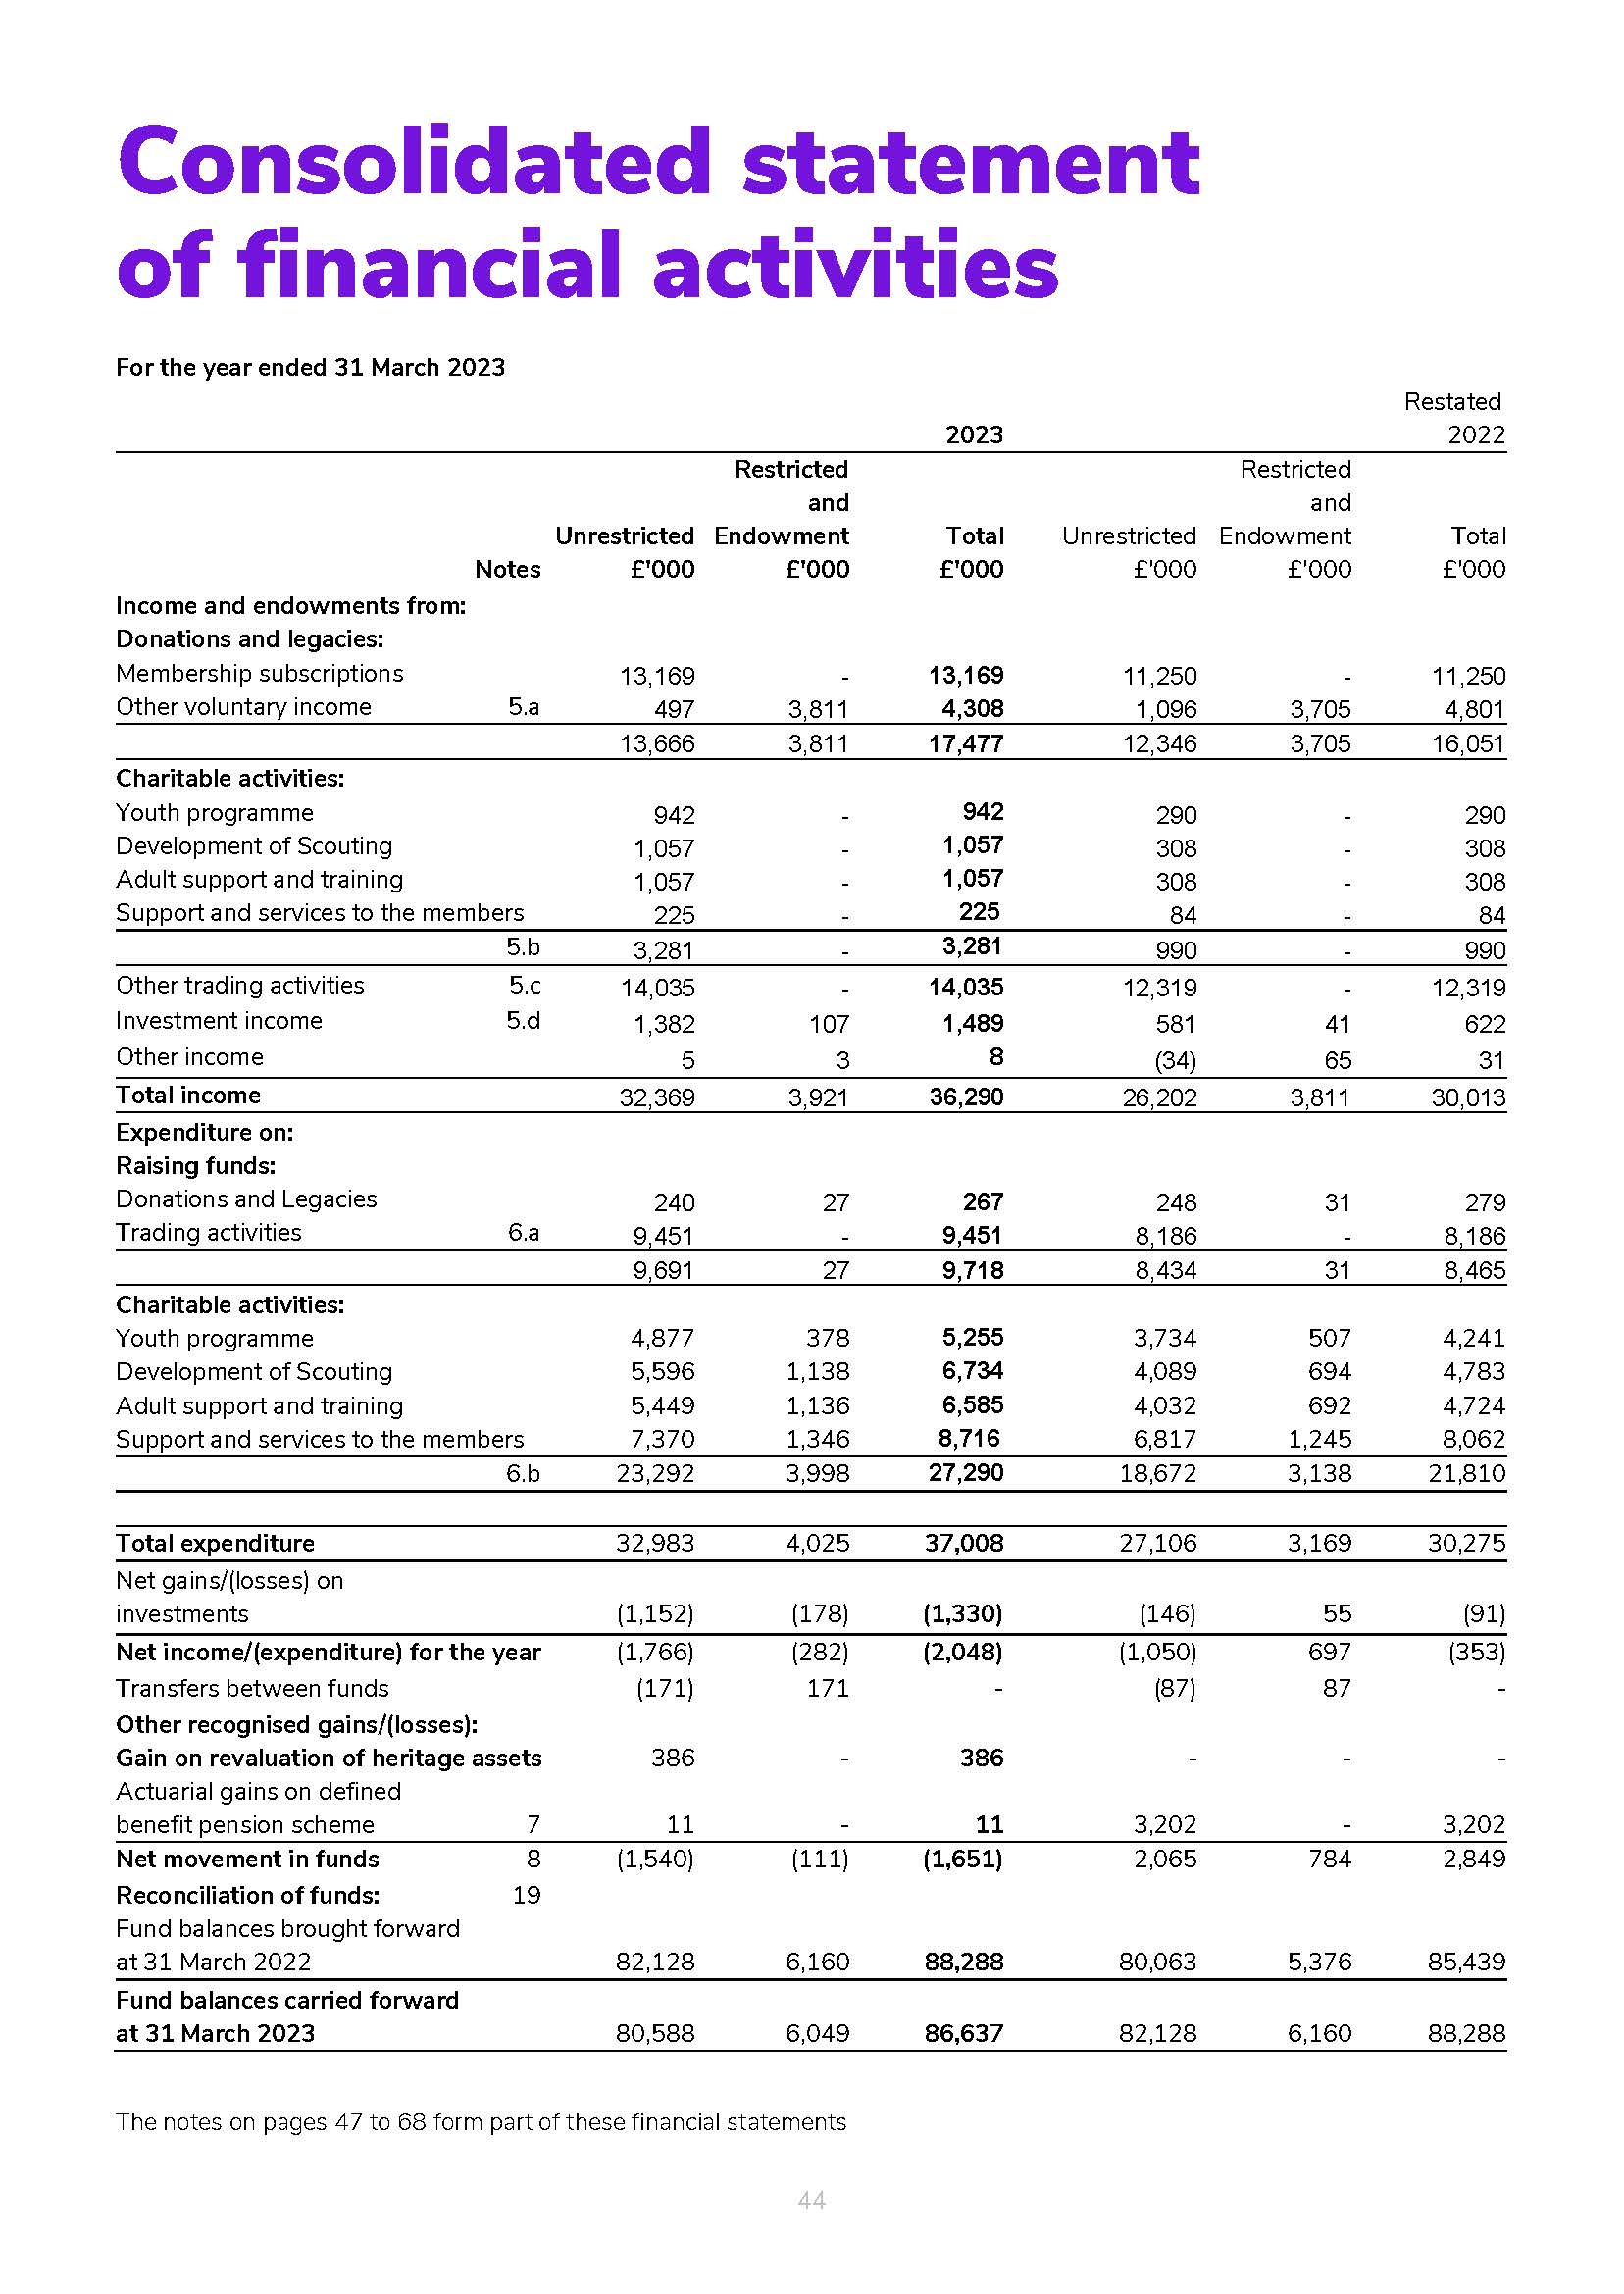 Consolidated statement of financial activities